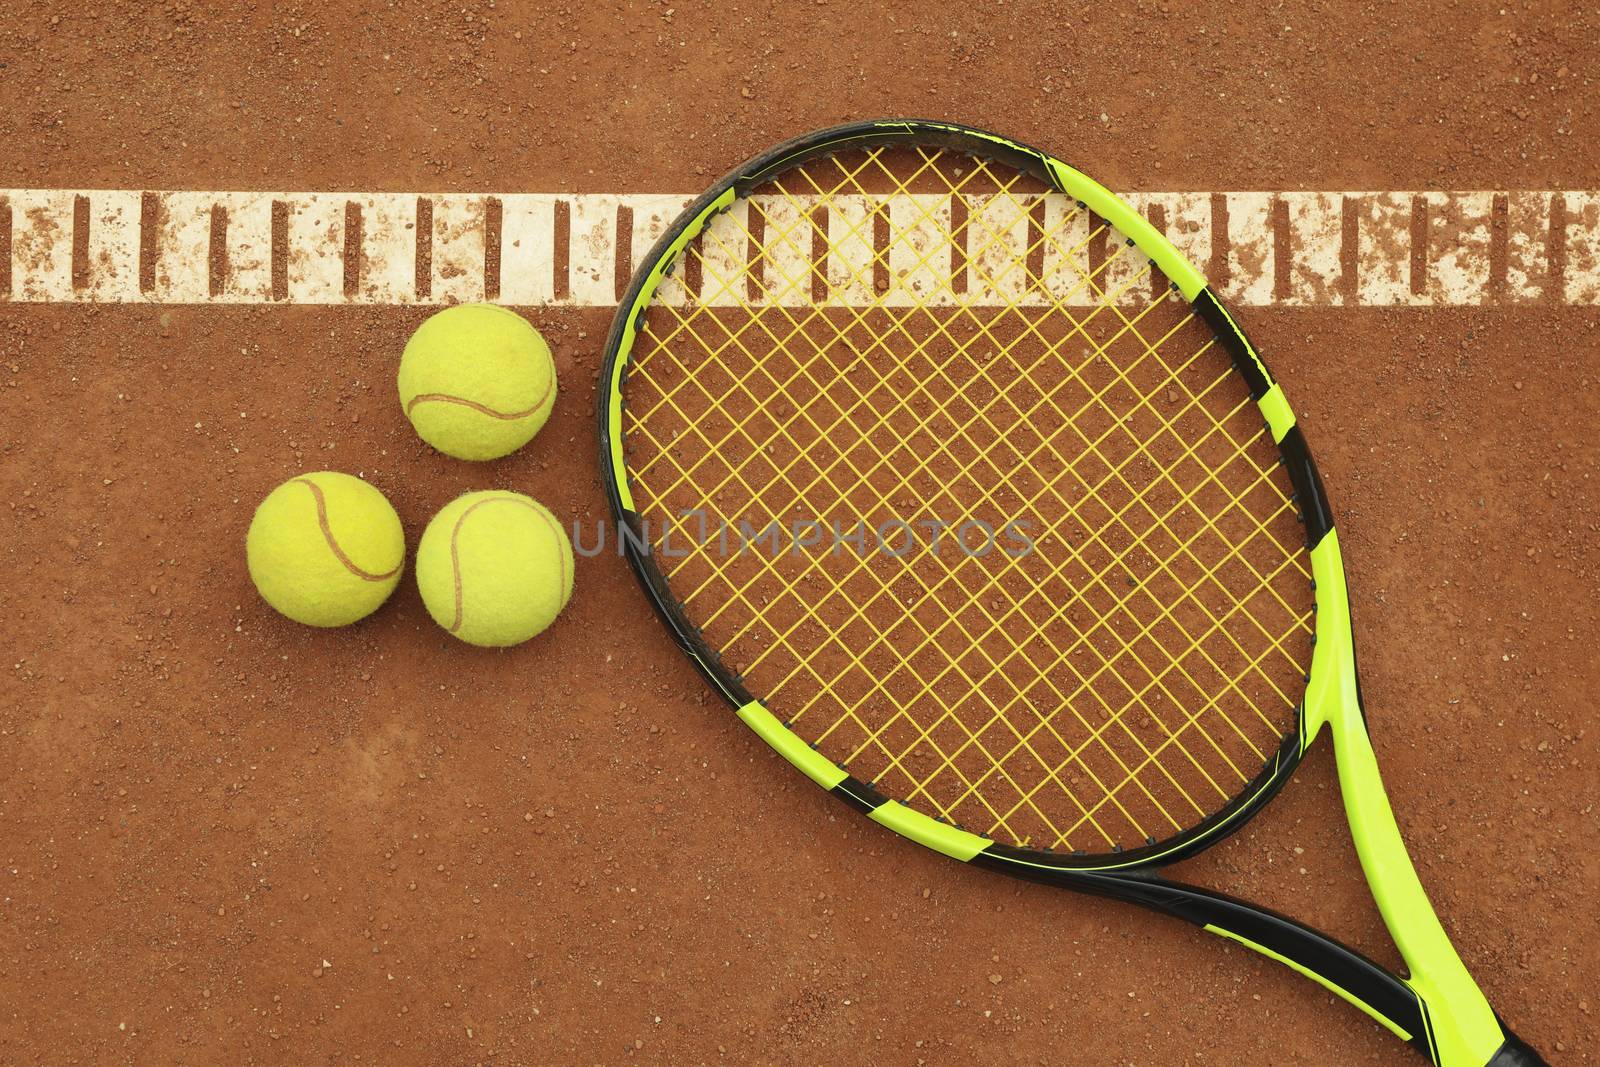 Tennis racquet with tennis balls on clay court